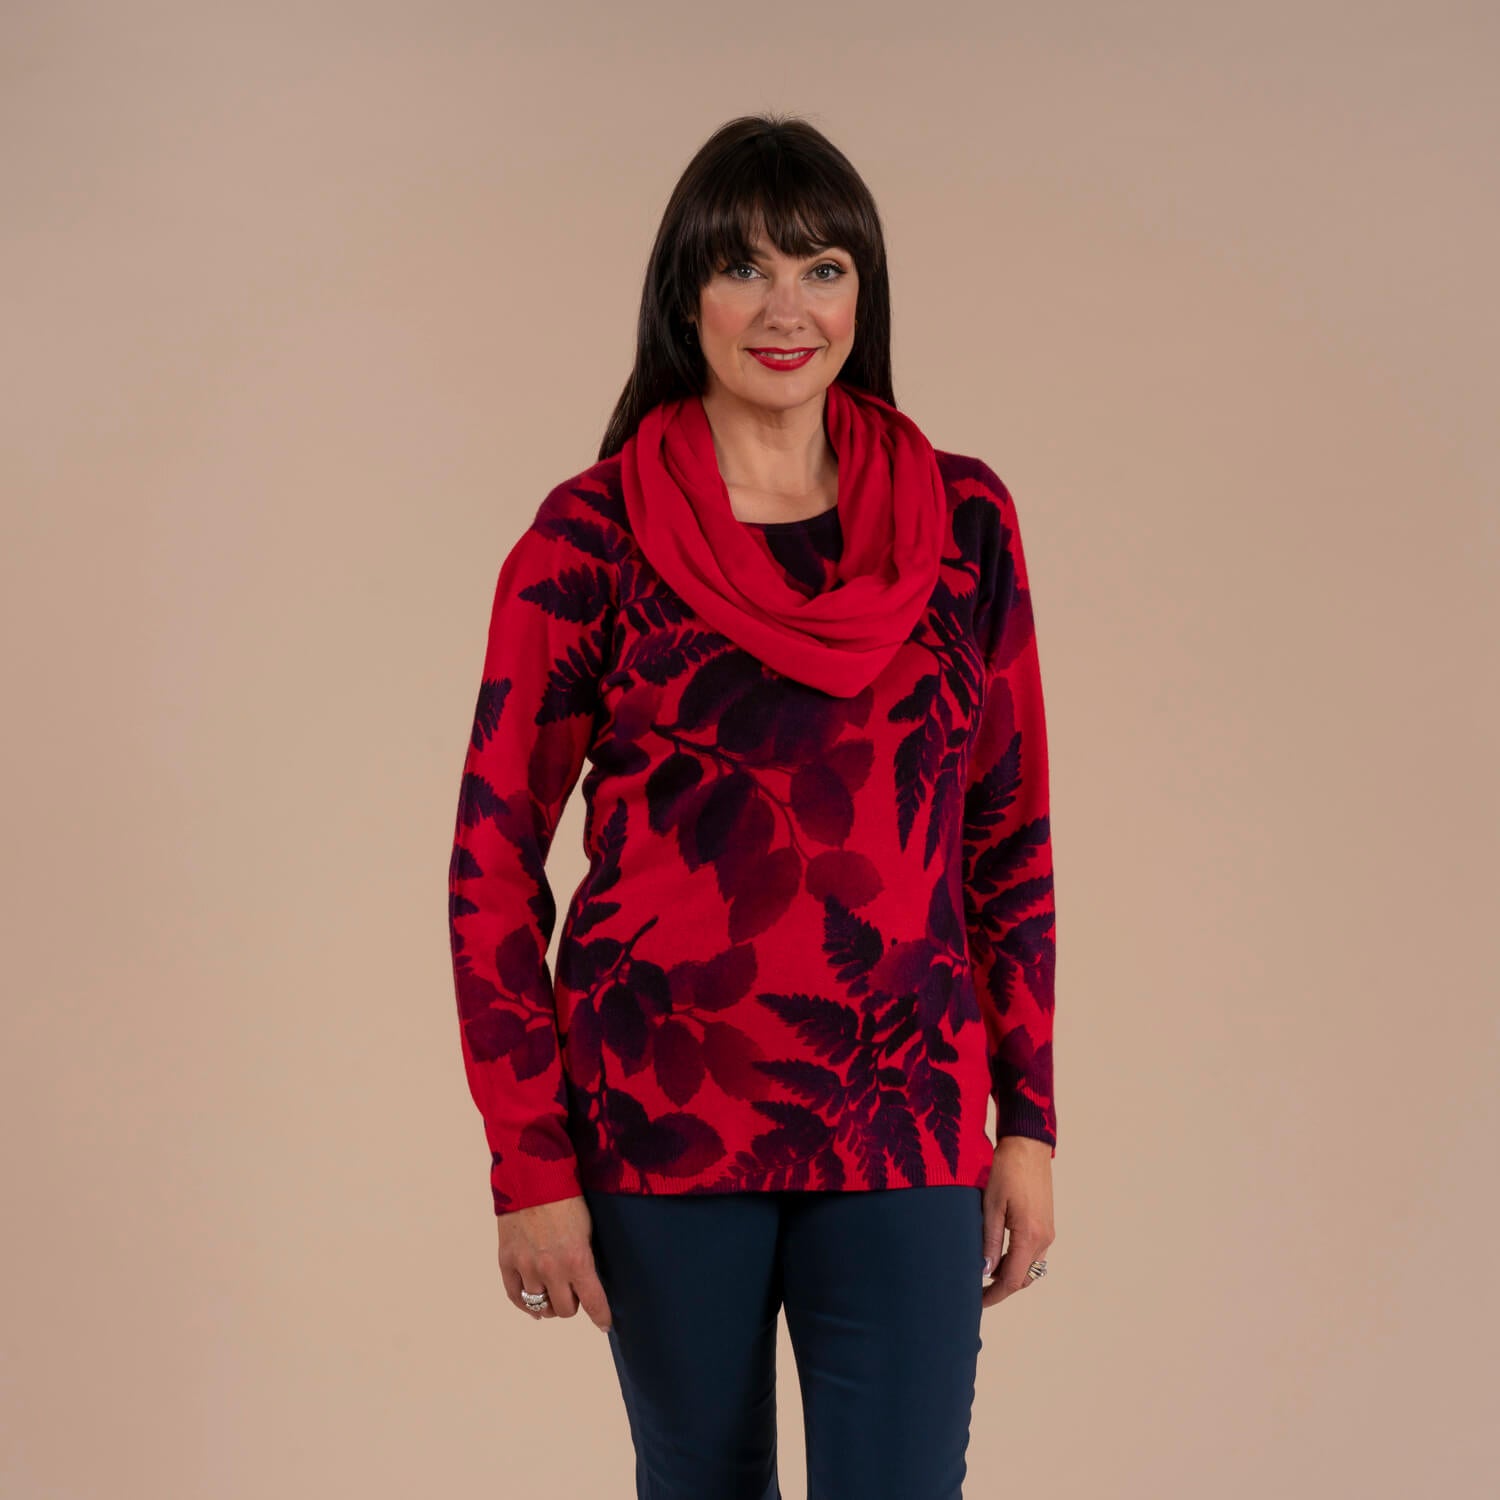 Tea Lane Scarf Floral Sweater - Red 1 Shaws Department Stores